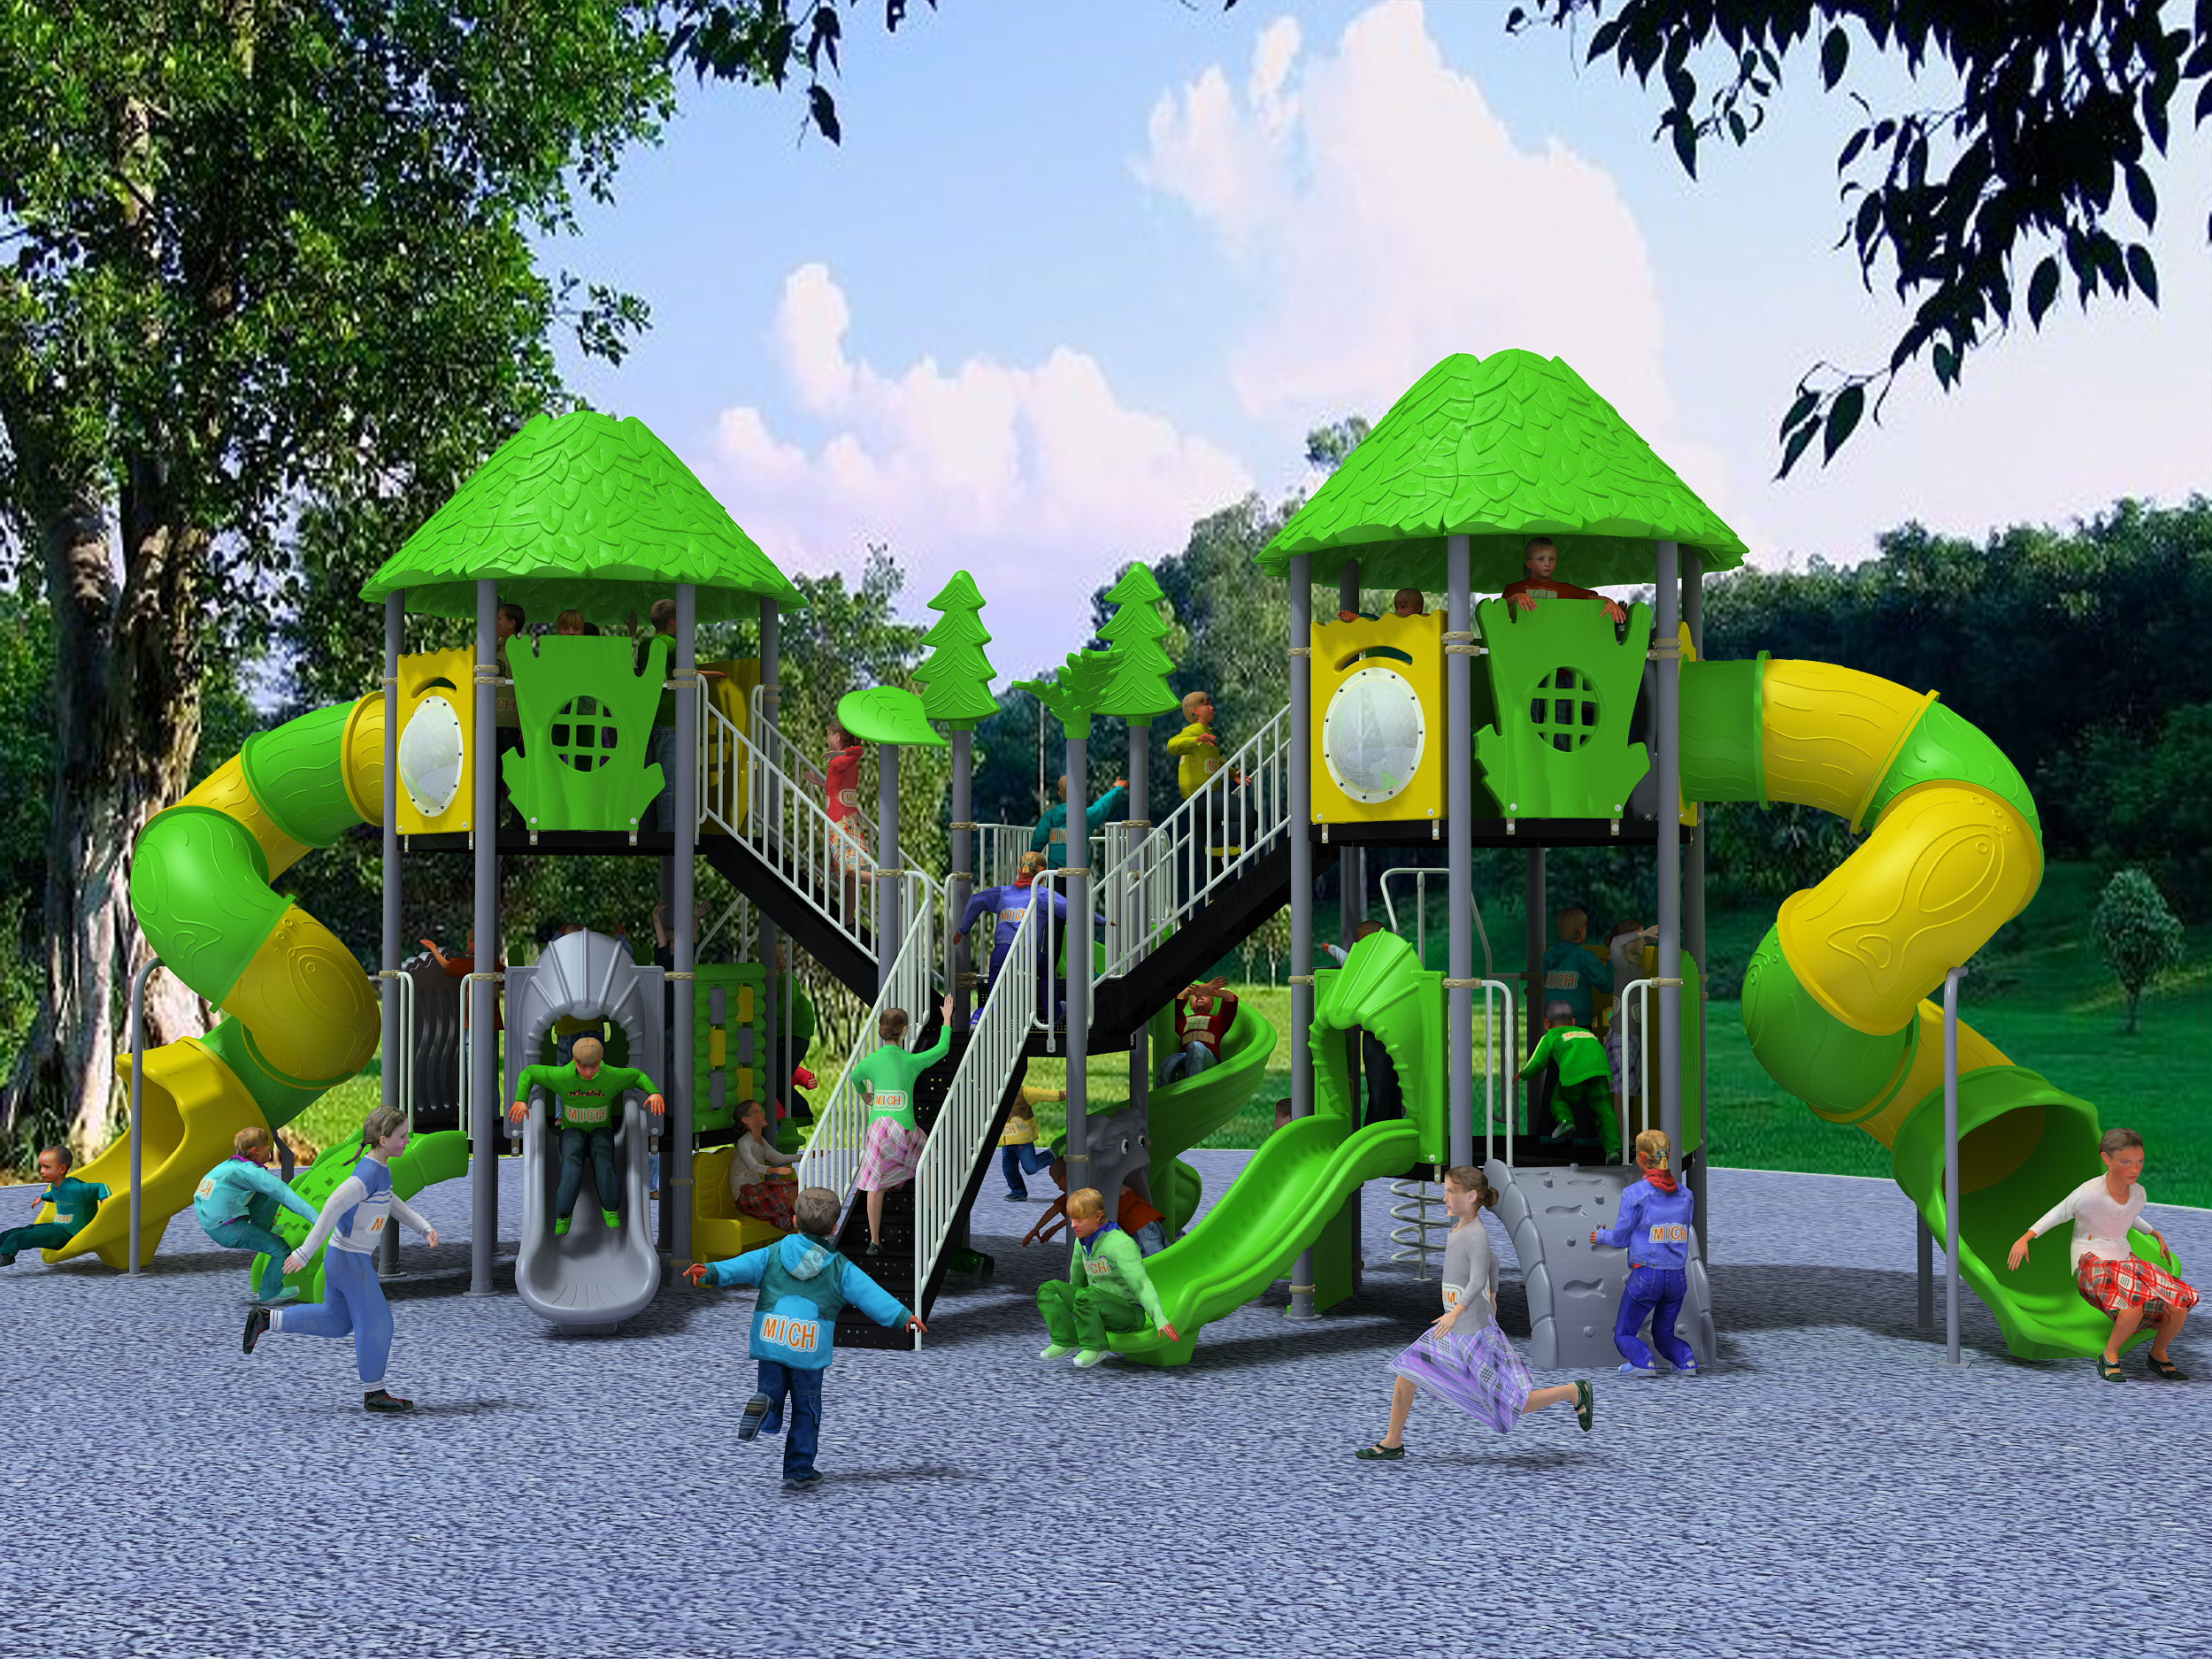 How to build a children's outdoor playground?